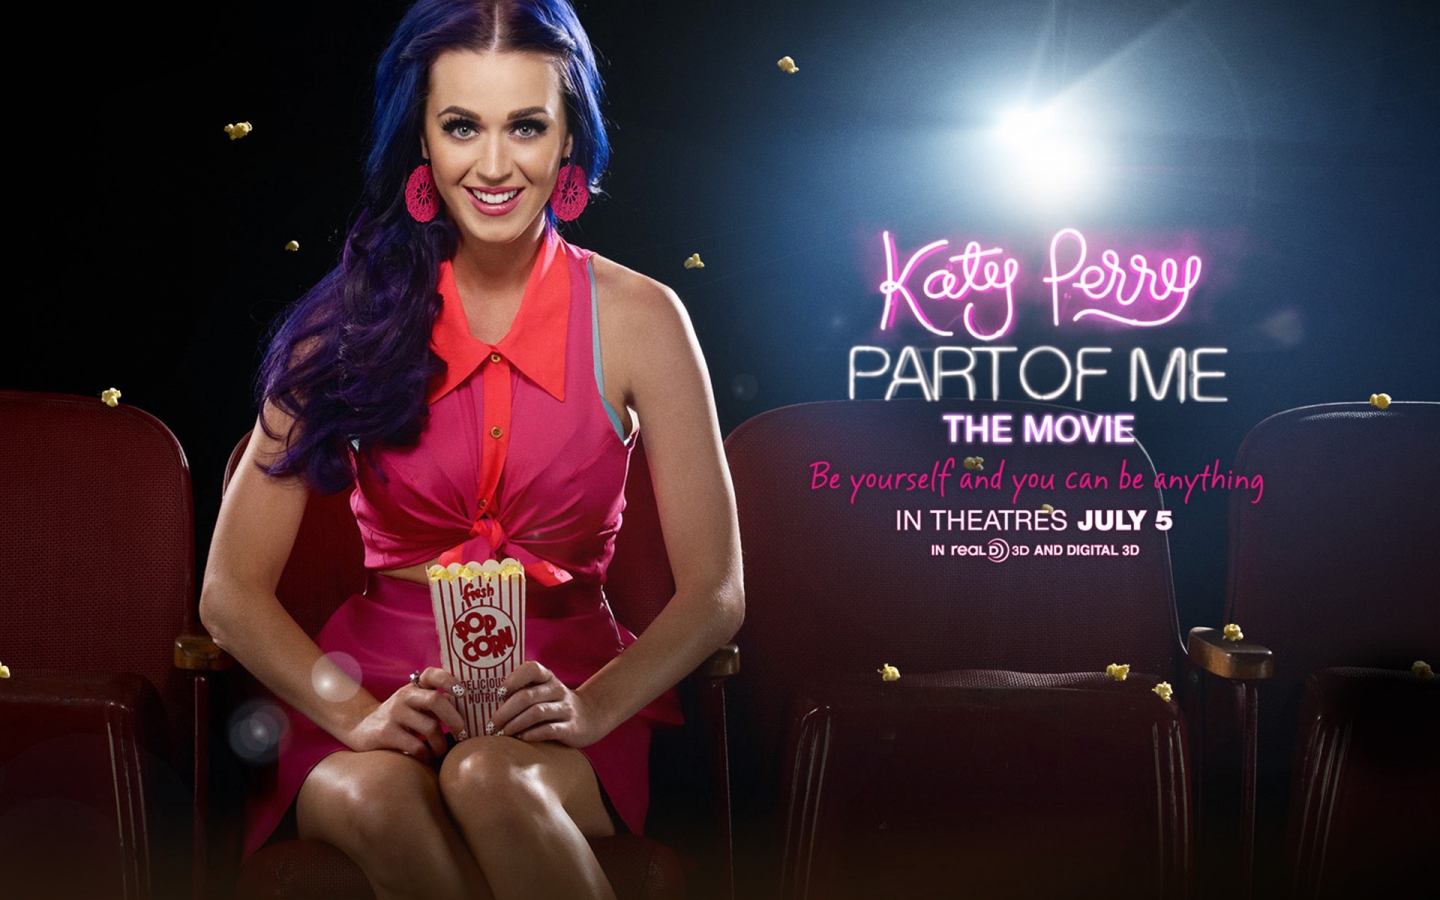 Katy Perry Part Of Me Movie 2012 for 1440 x 900 widescreen resolution